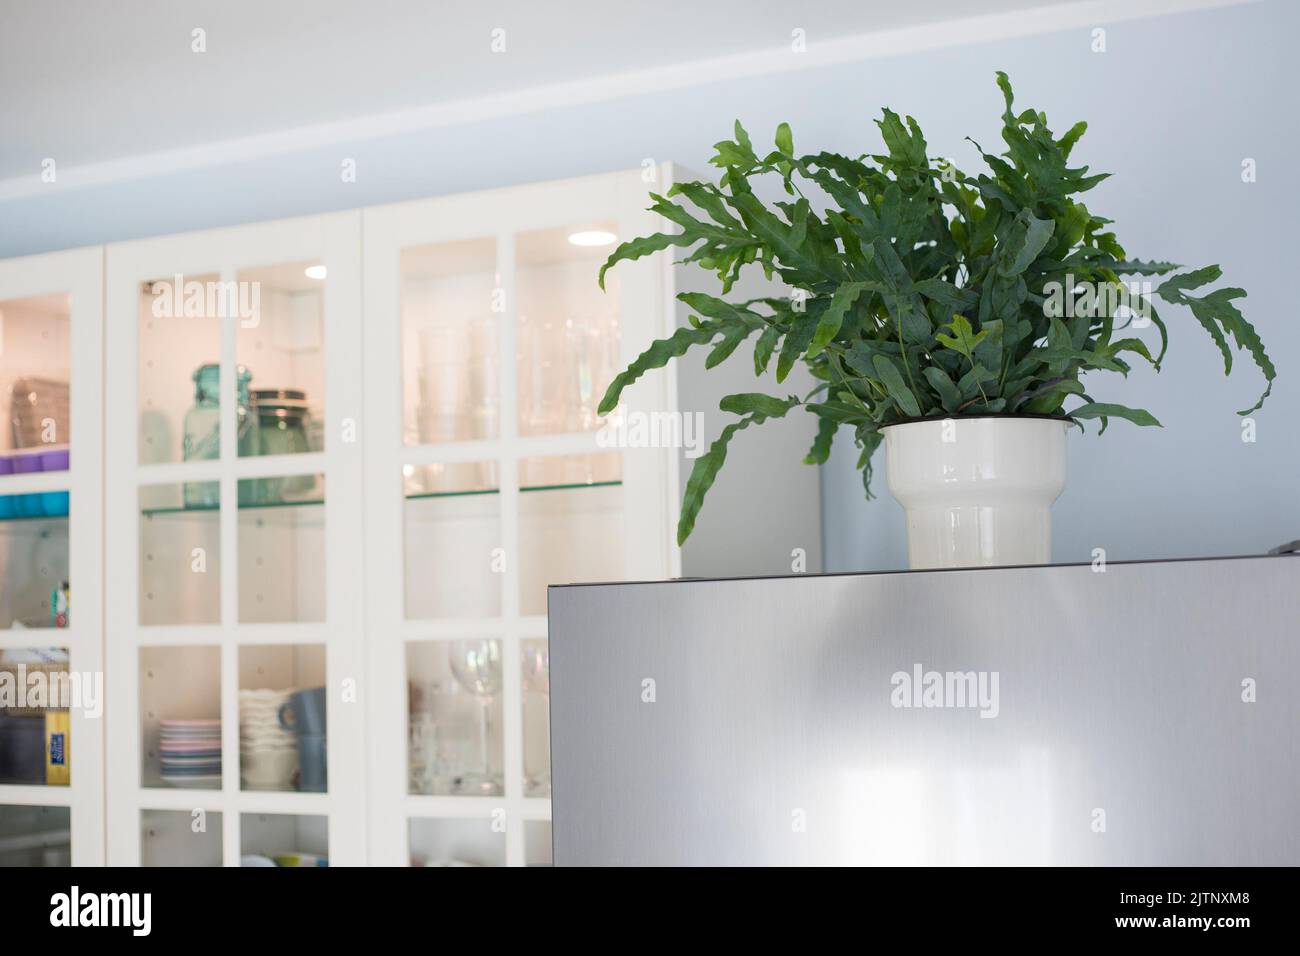 A plant of Blue Star fern (Phlebodium aureum), a fancy houseplant, on top of the fridge in a kitchen. Stock Photo